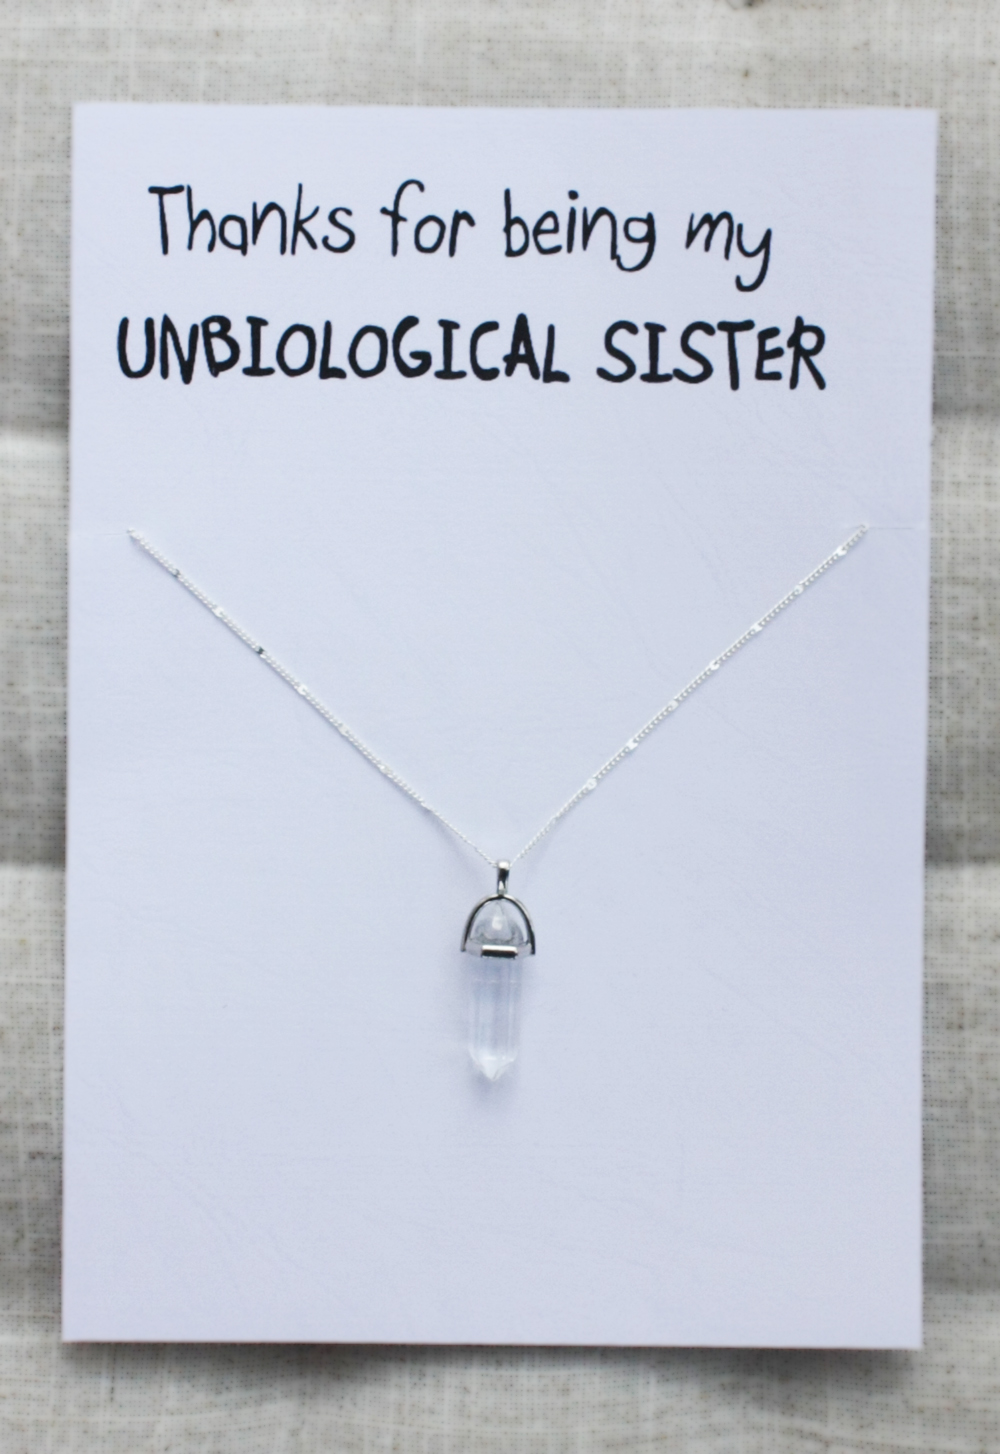 Stone Pendant Fashion Thanks For Being My Unbiological Sister Card Woman Necklace